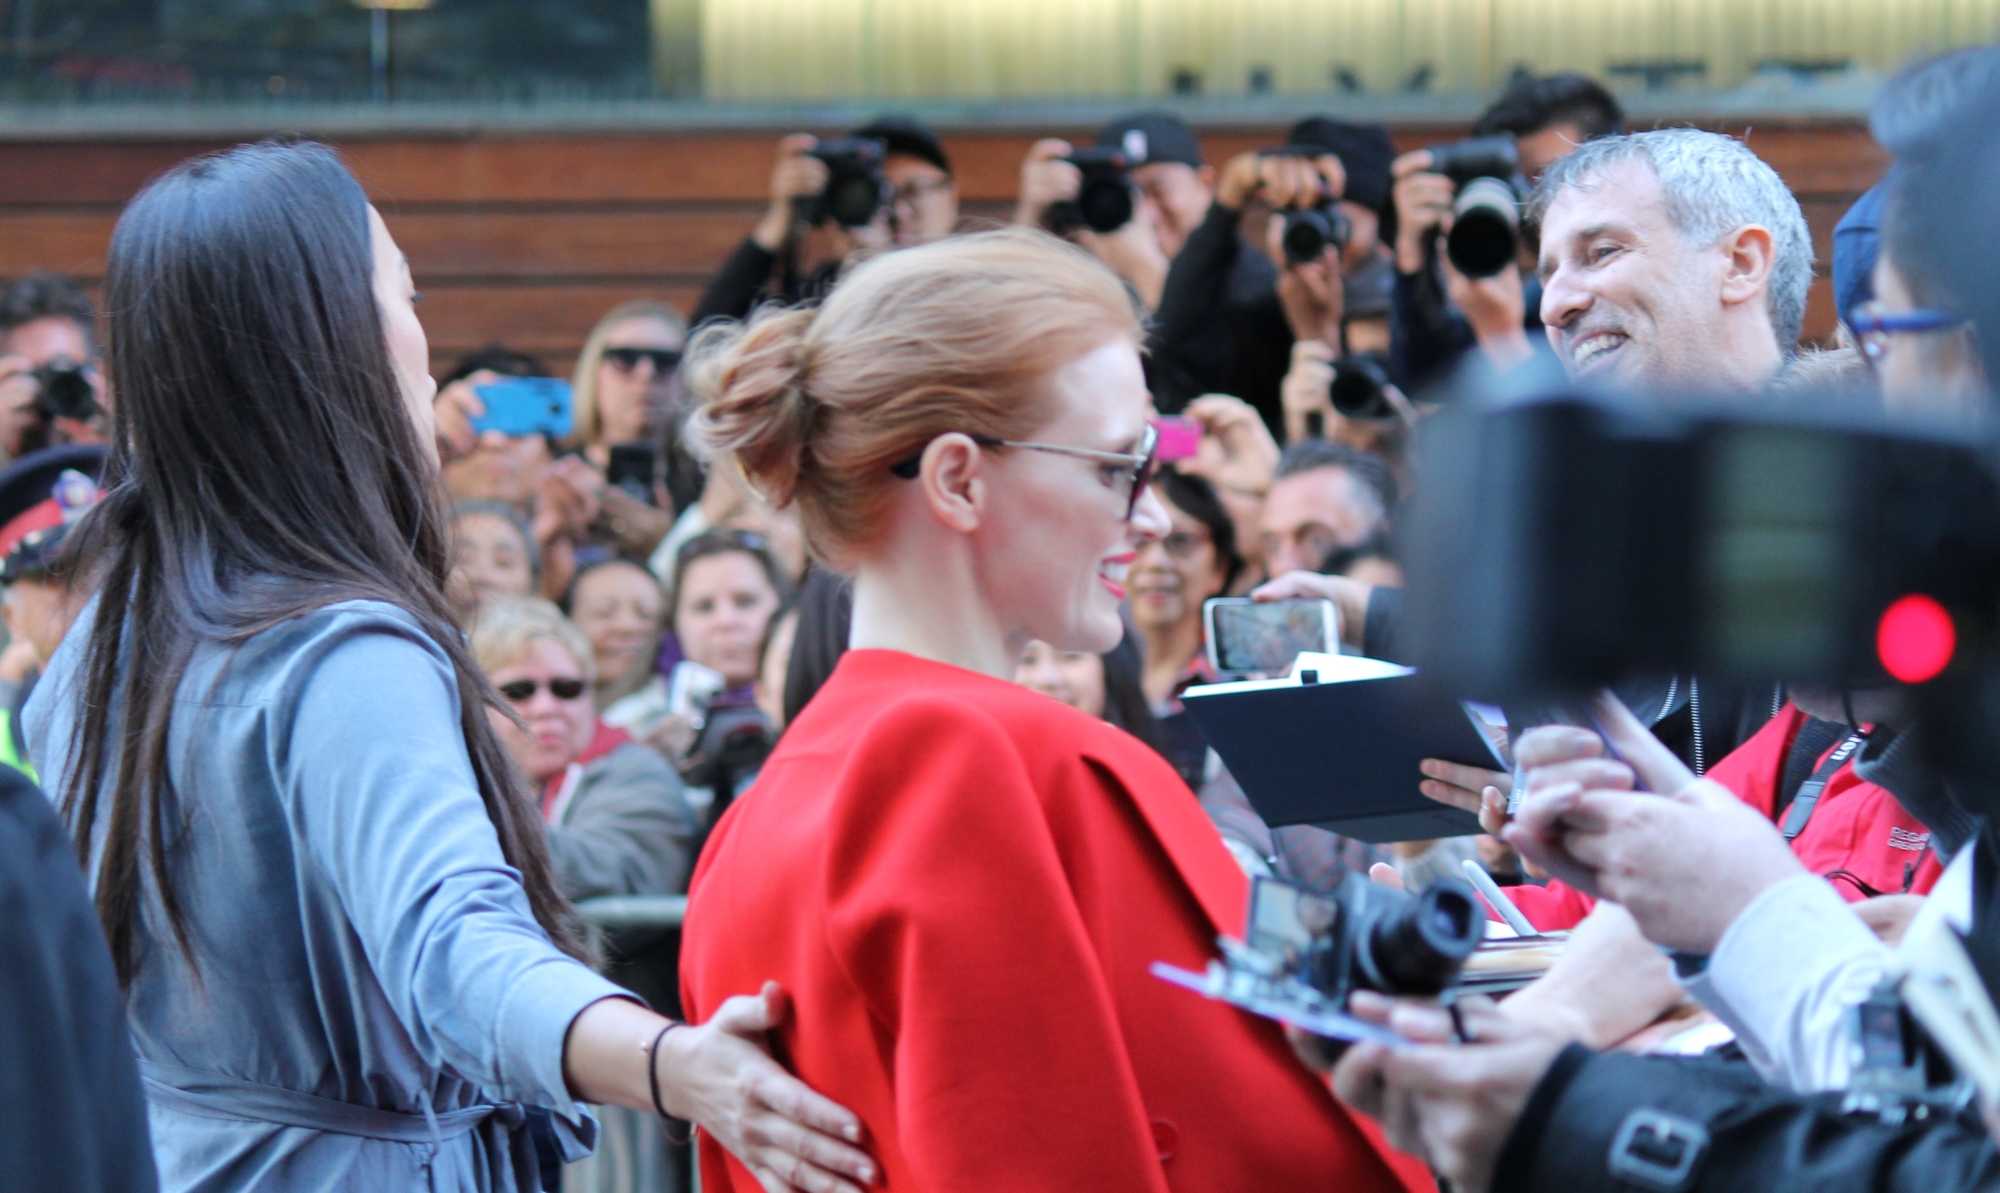 Actress Jessica Chastain in Toronto